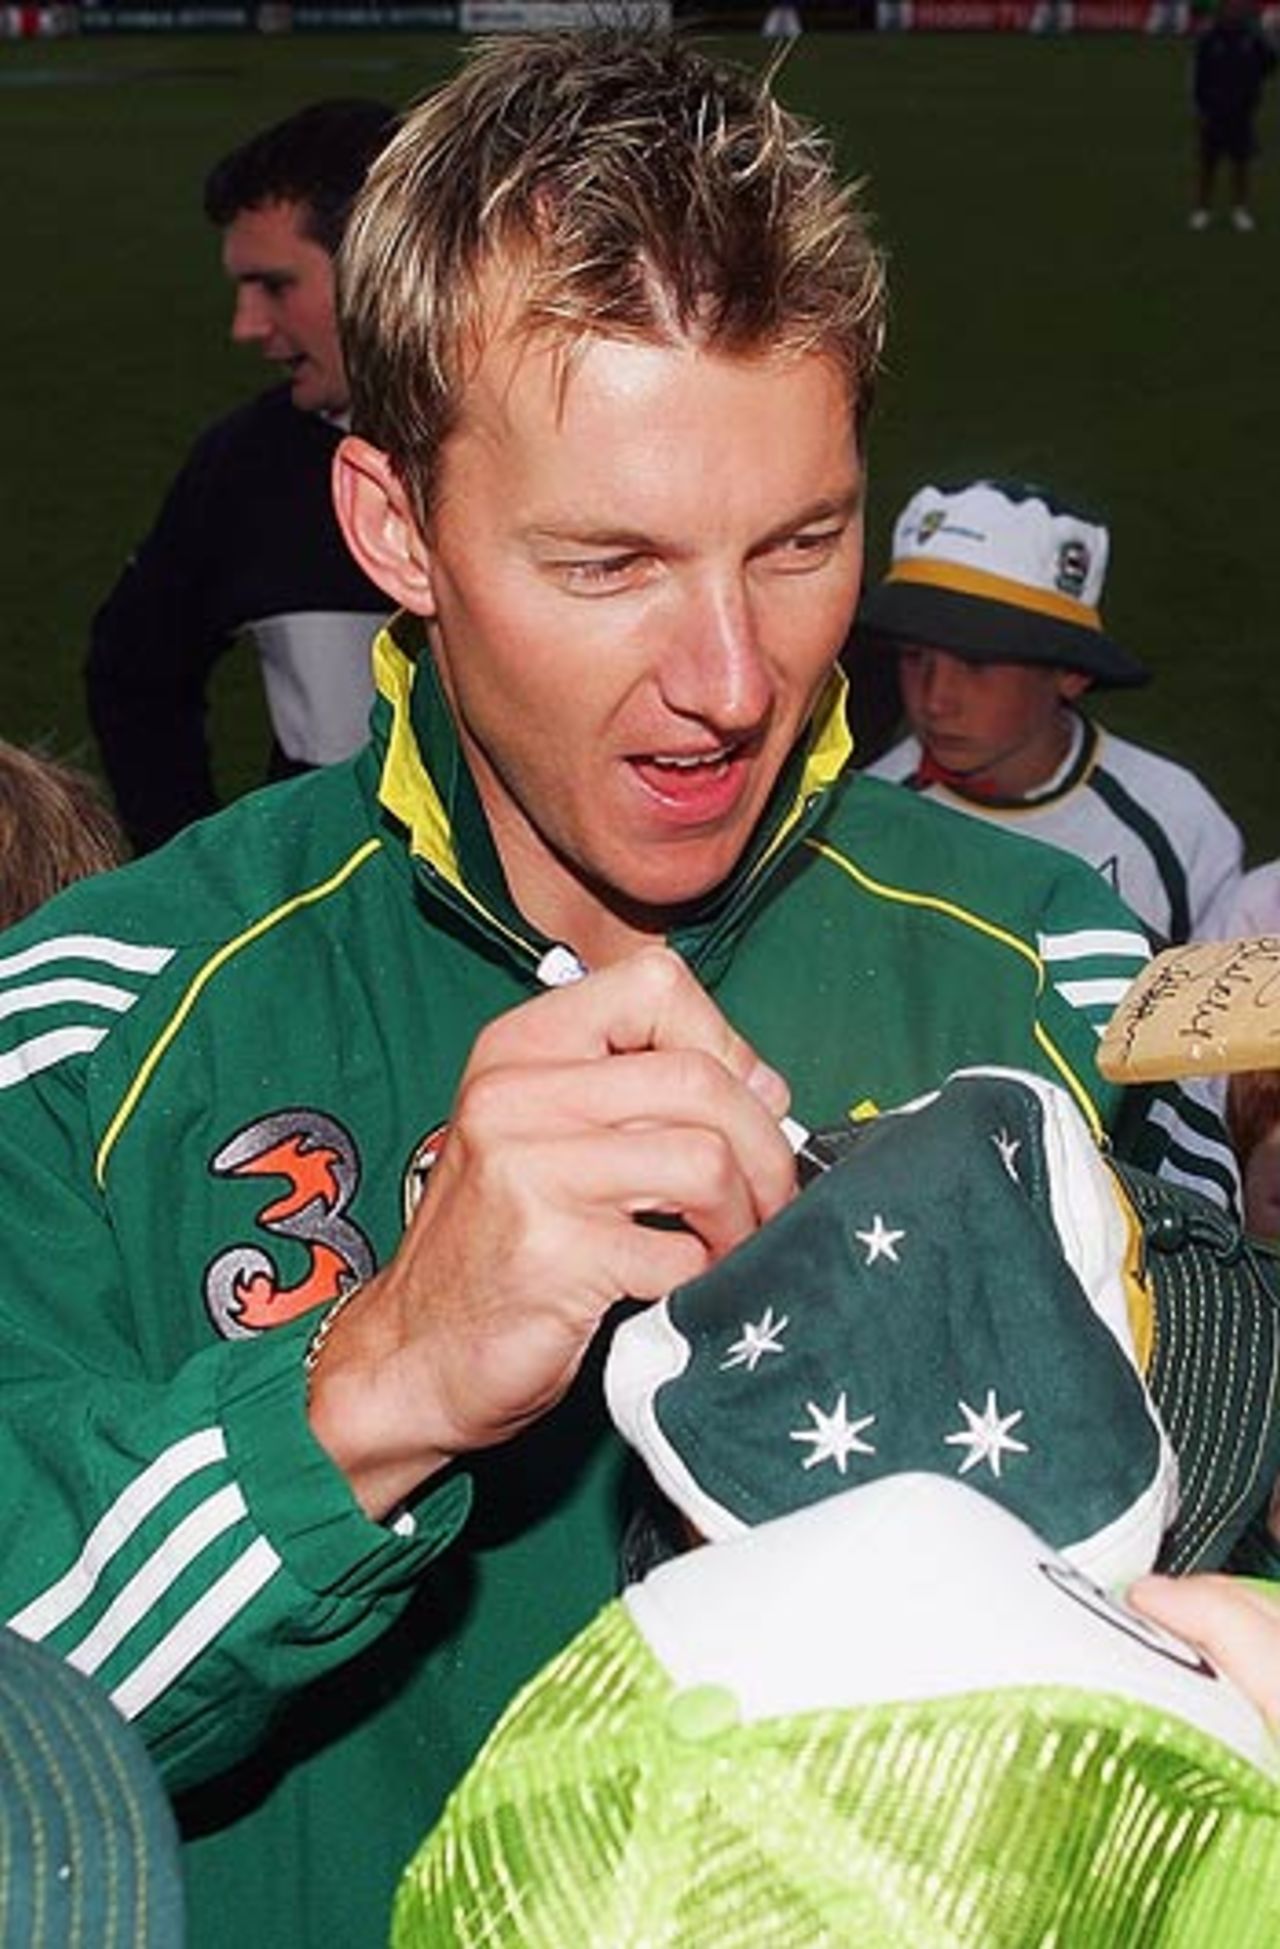 Brett Lee signed autographs as rain delayed start of the second day's play, Australia v West Indies, 2nd Test, Hobart, 2nd day, November 18, 2005